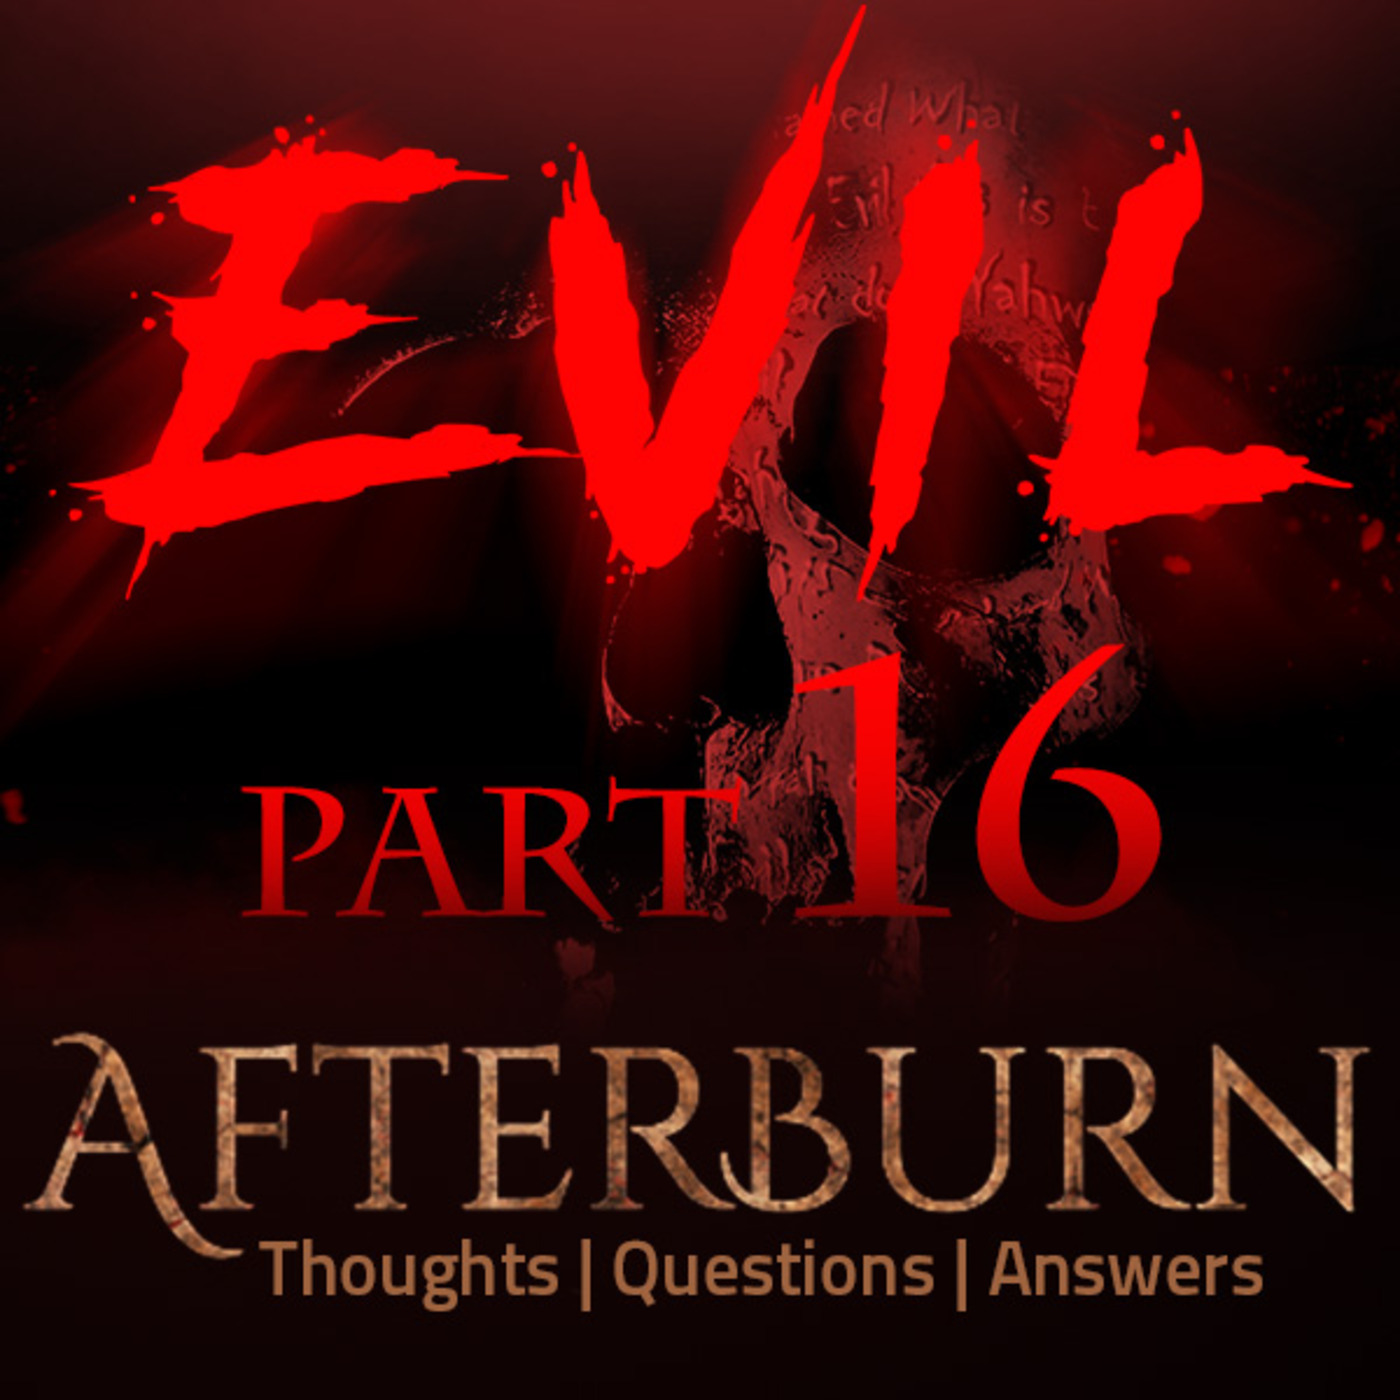 Episode 744: Afterburn | Thoughts, Q&A on Evil | Part 16